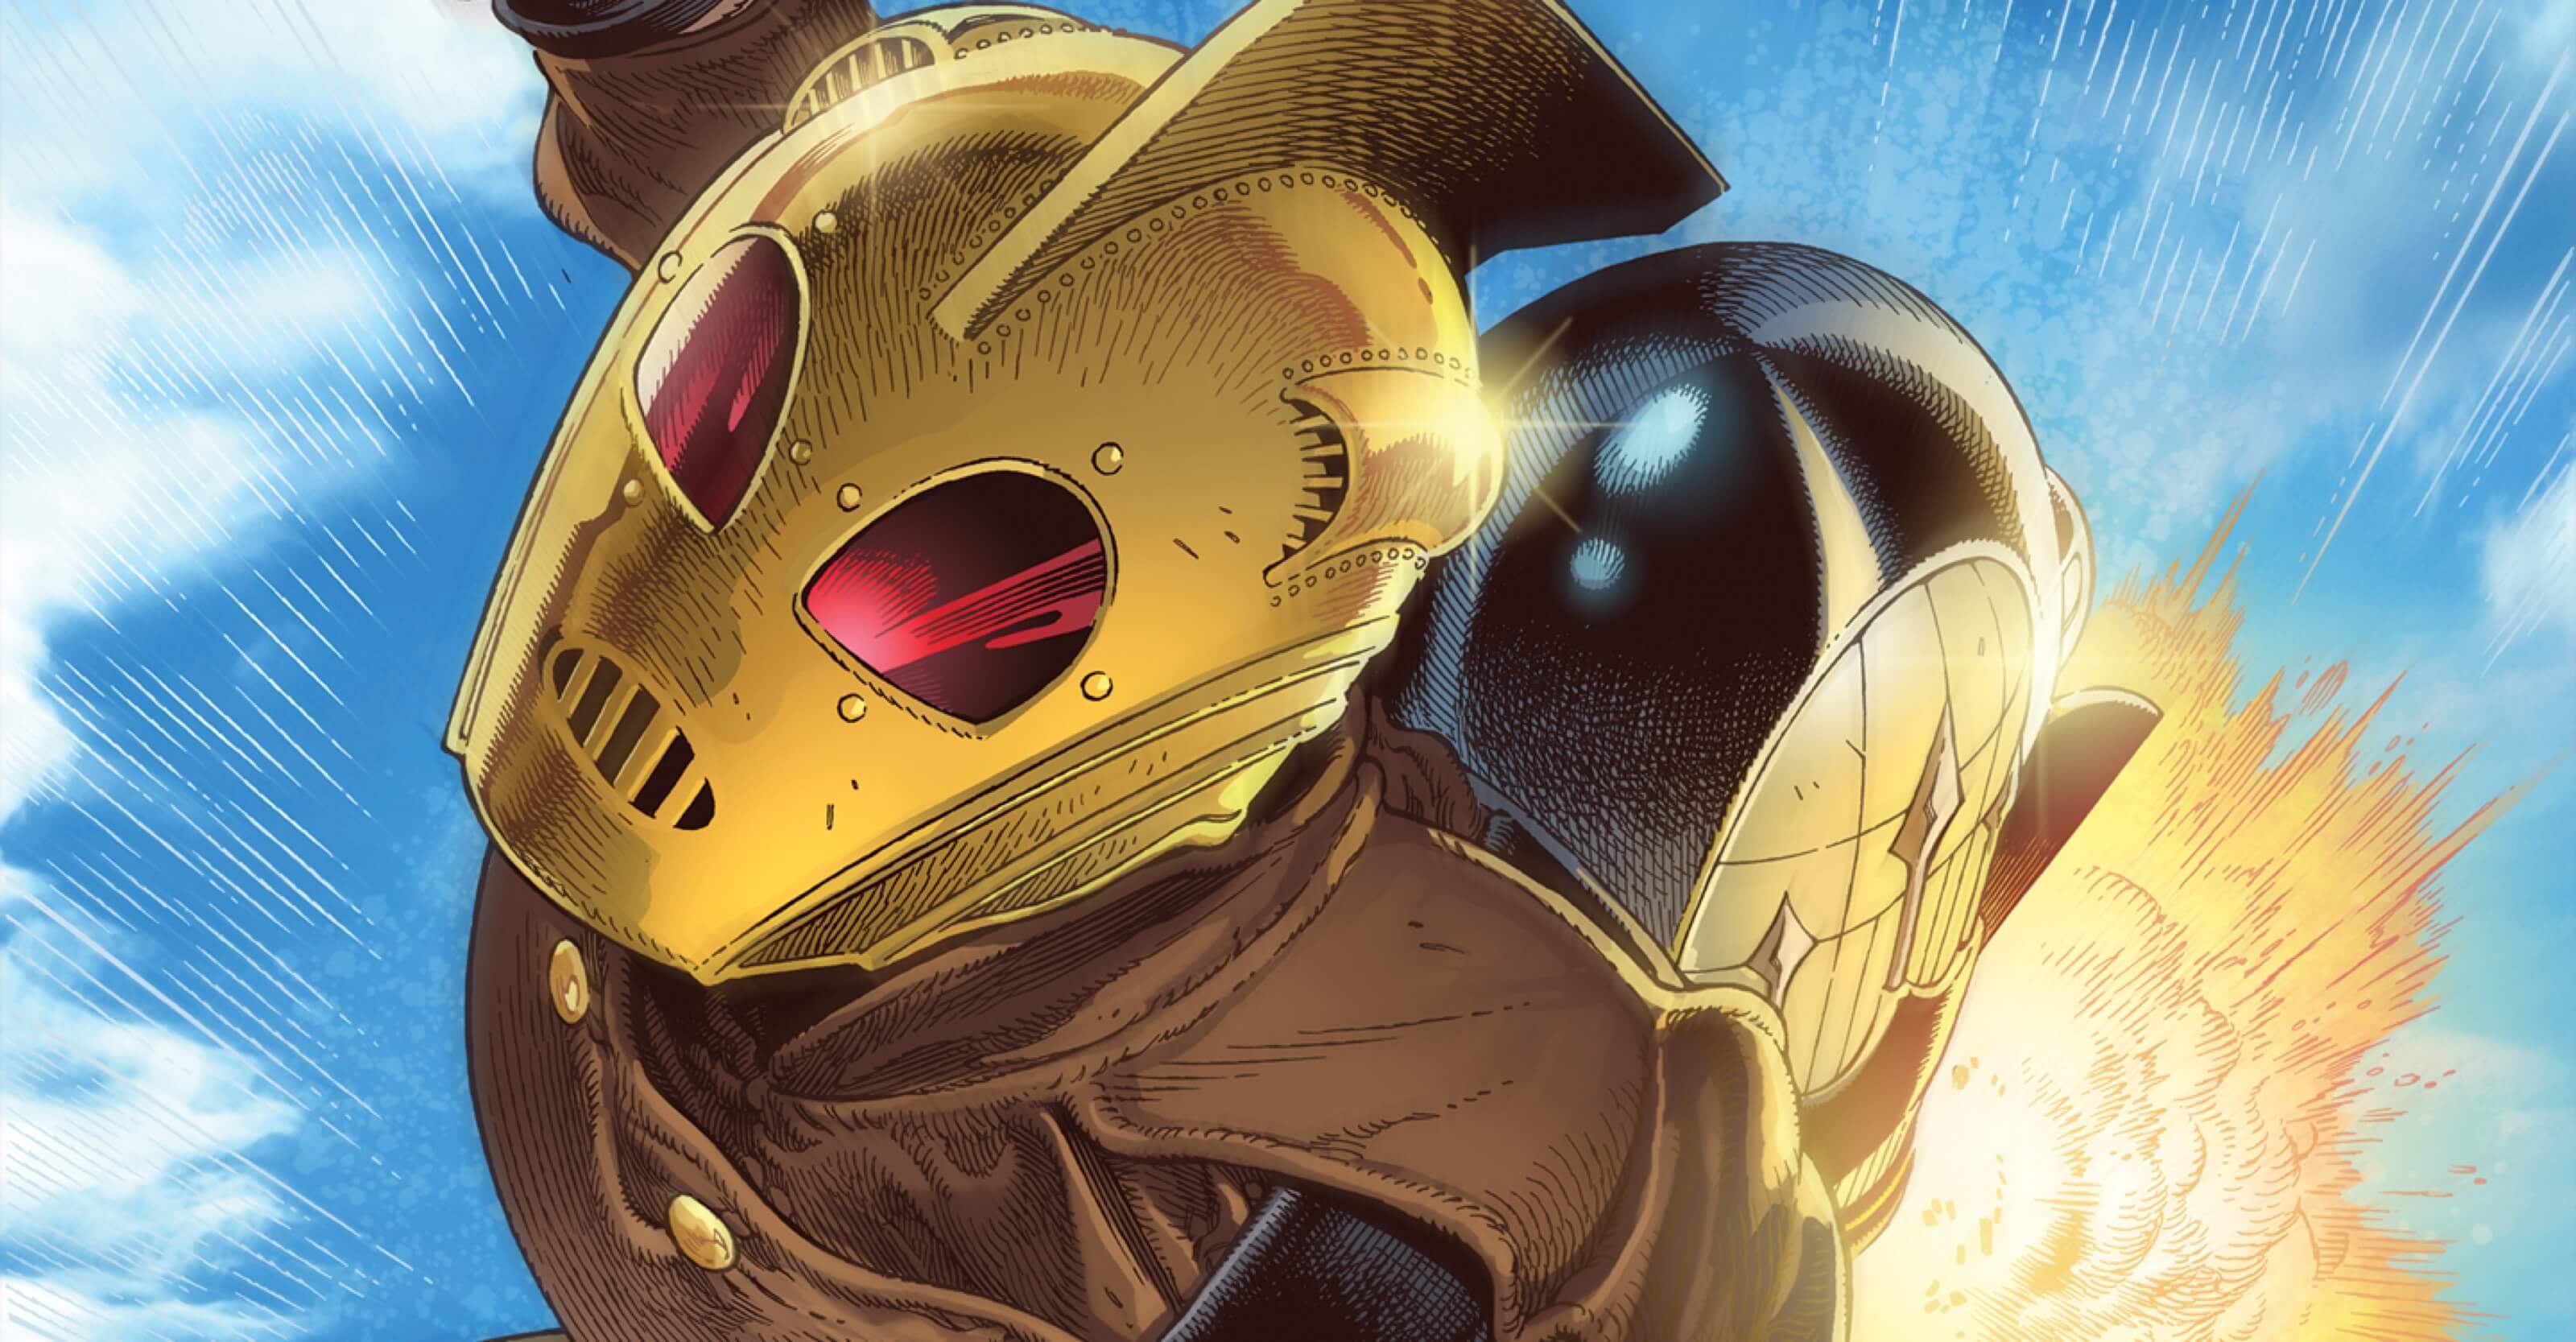 The Rocketeer: The Great Race Comic Book Celebrates the 40th Anniversary of the High-Flying Adventurer